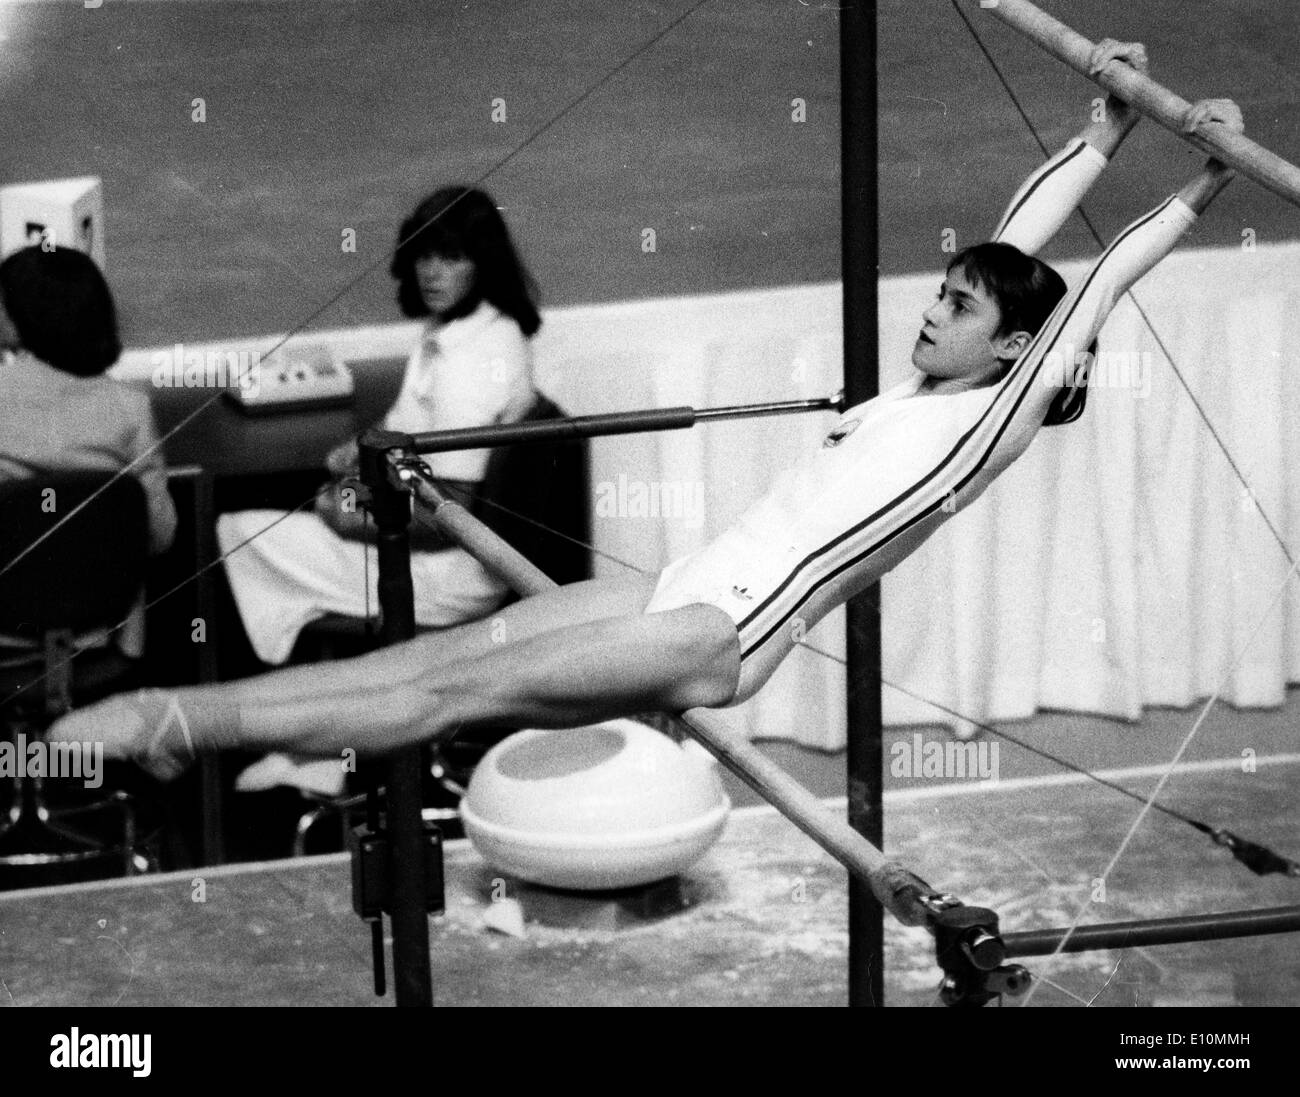 Gymnast Nadia Comaneci competes in Montreal Olympics Stock Photo